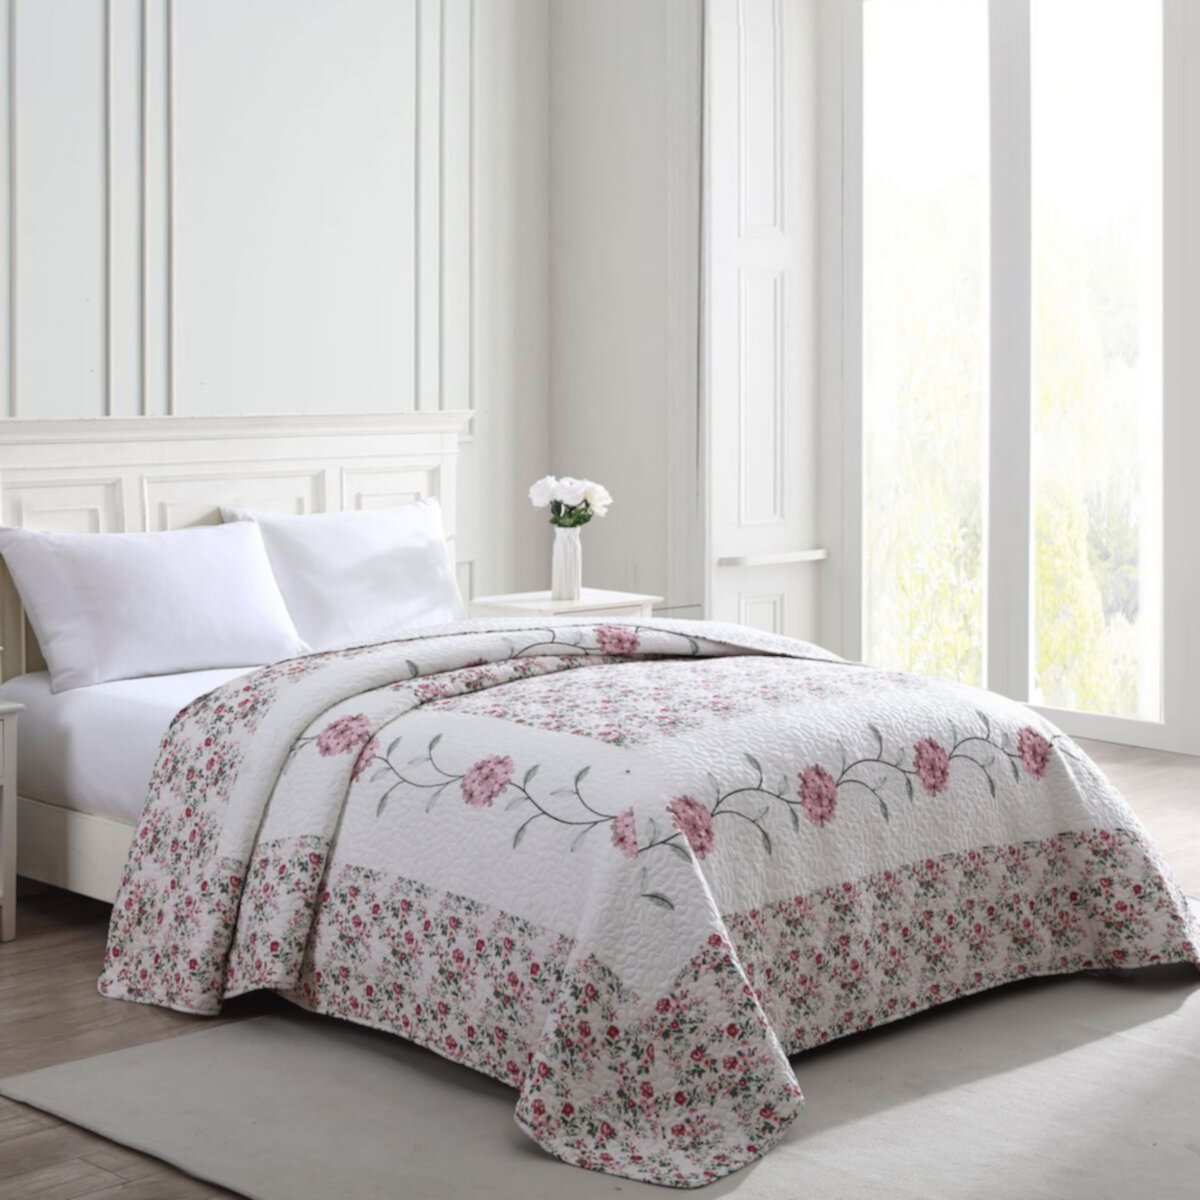 Beatrice Home Fashions Carnation Embroidered Bedspread or Sham Beatrice Home